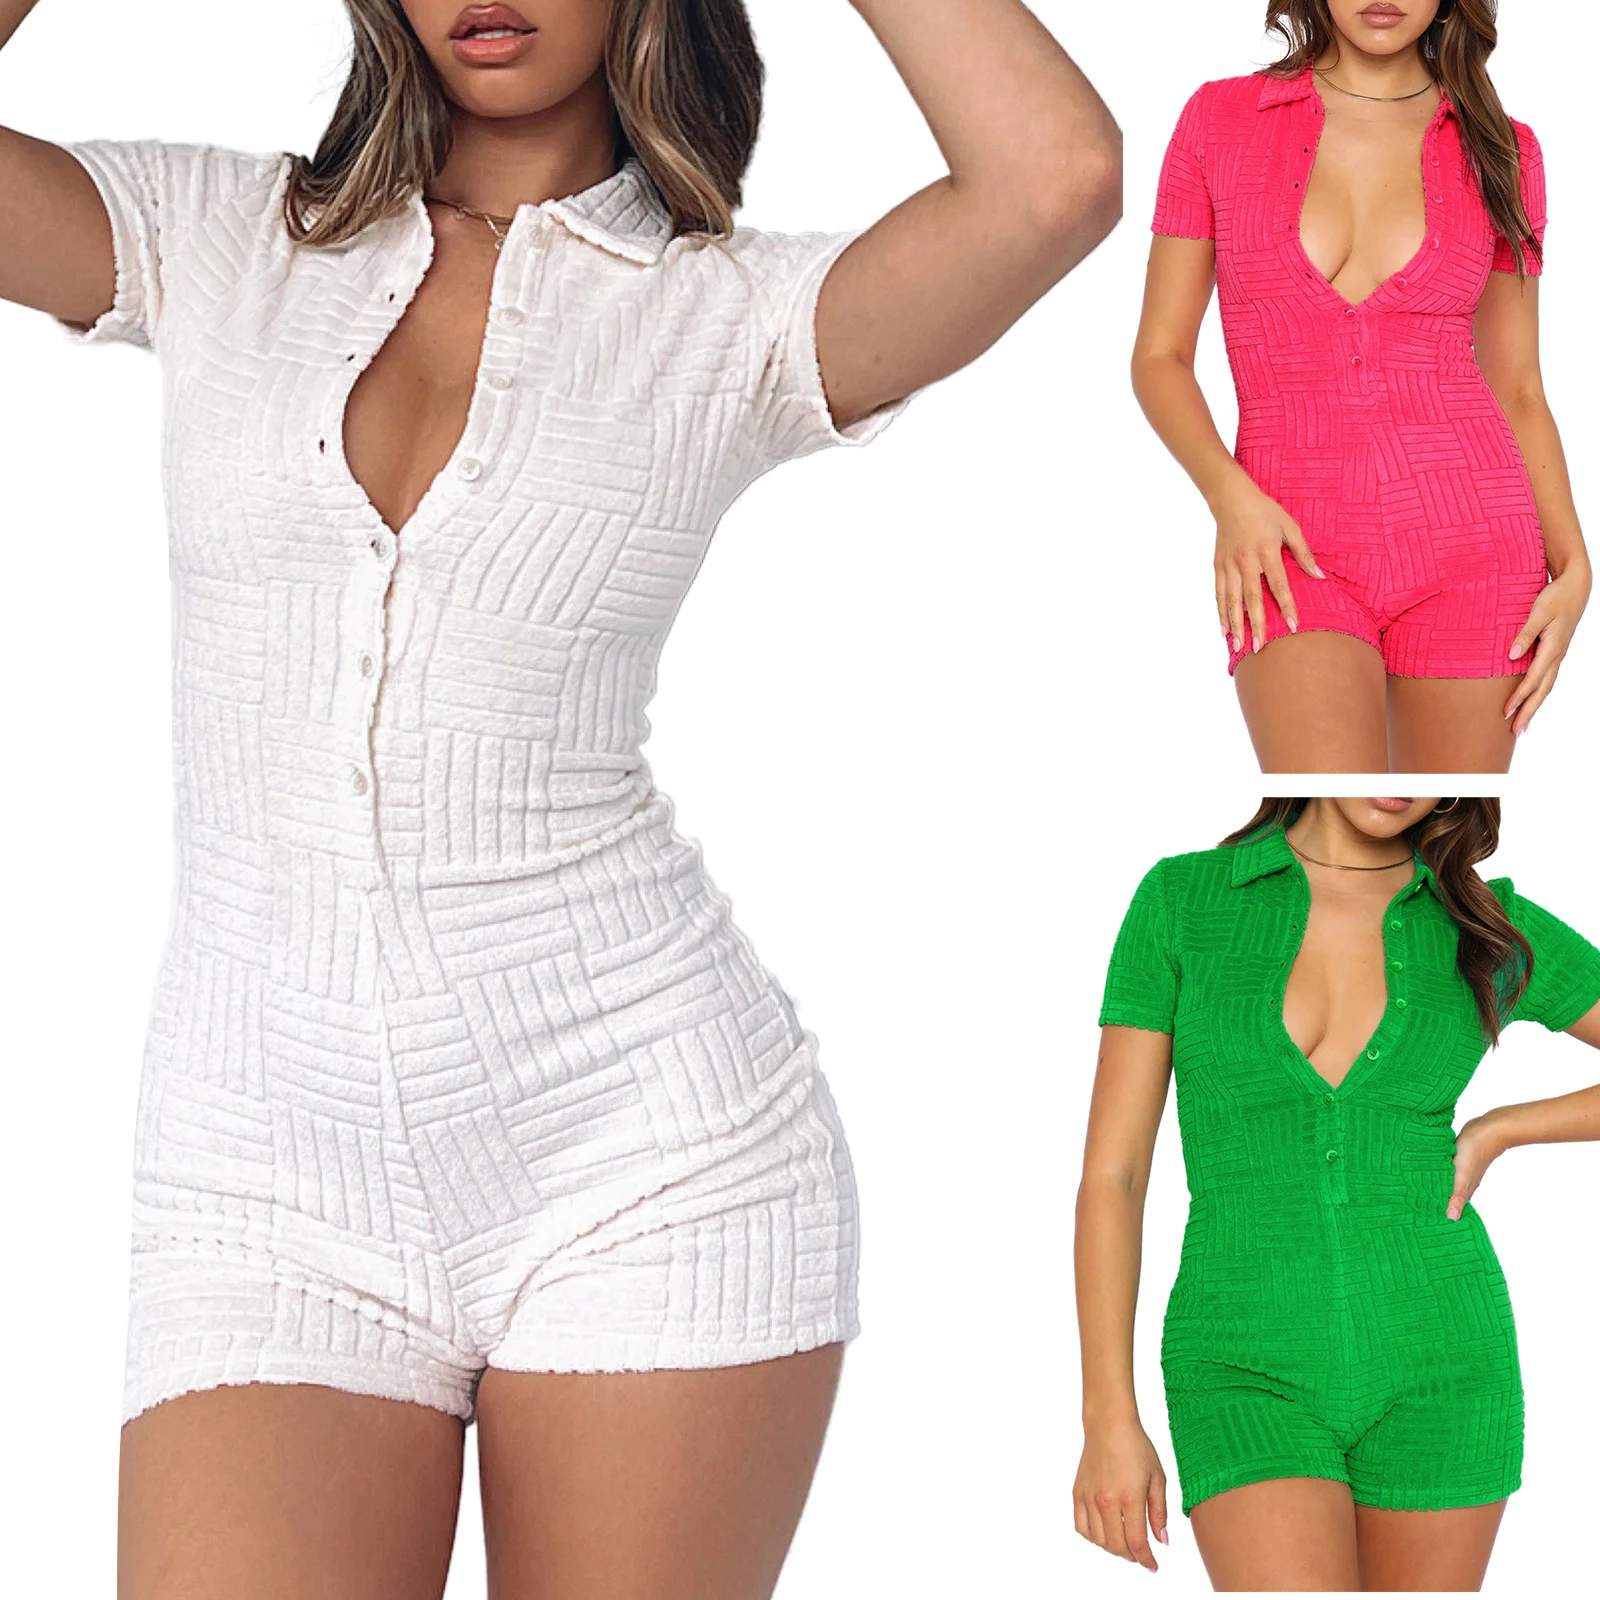 

New Women's Fashion Sexy Slim Rompers Short Sleeve Solid Color Stripe Textured Slim Fitting Bodysuit Short Playsuit Streetwear